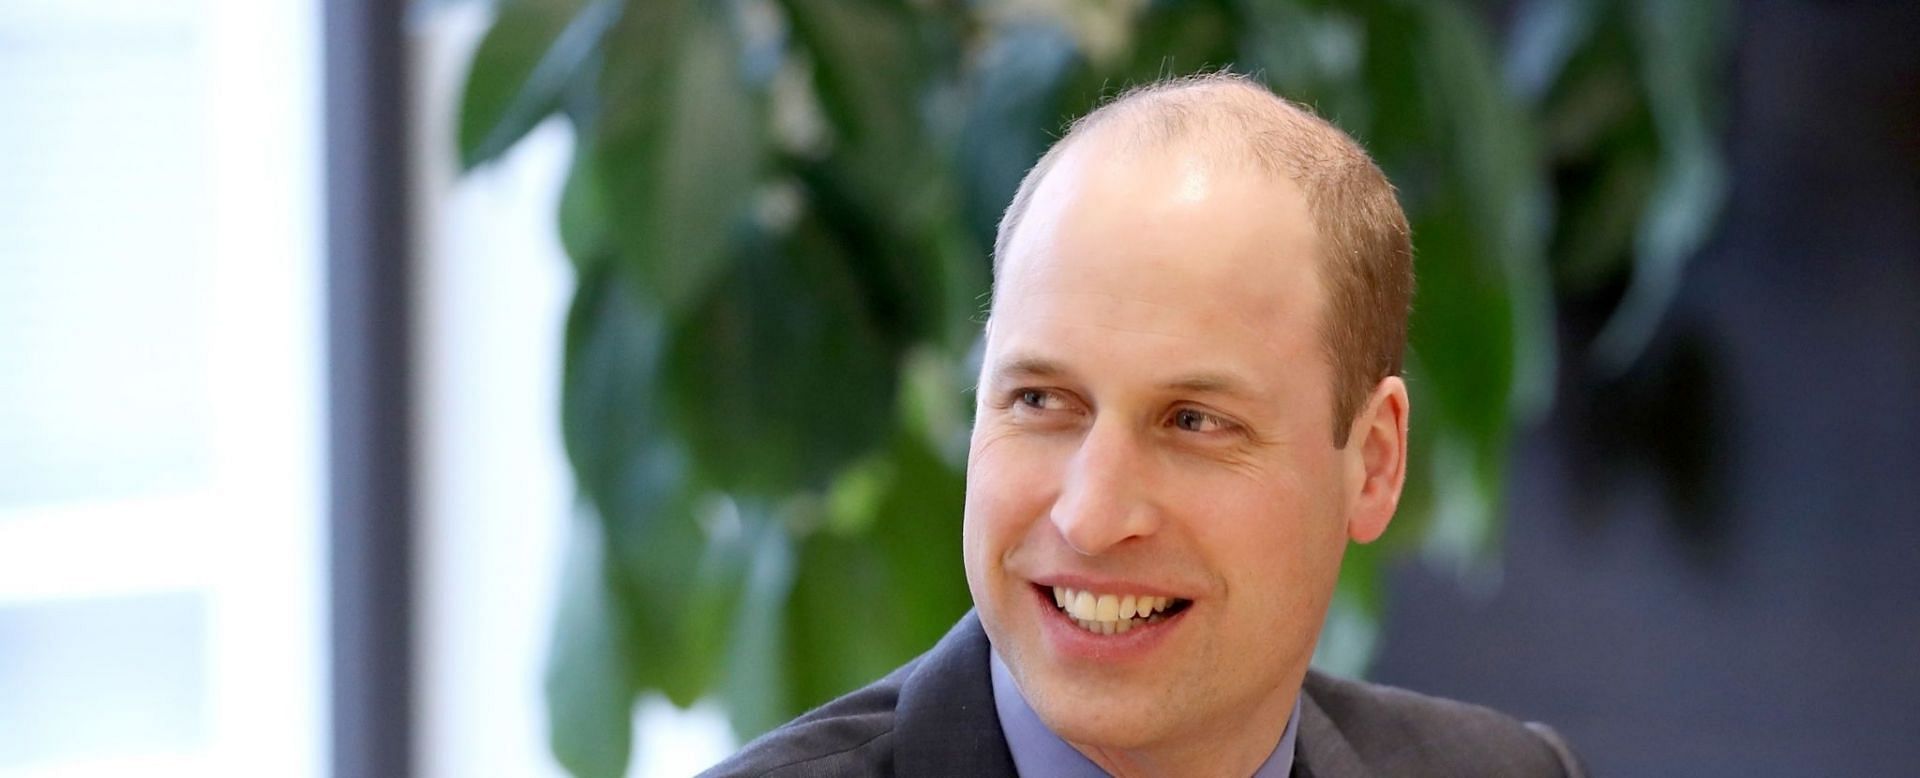 Netizens trended Prince William recalling his past rumored affair (Image via Chris Jackson/Getty Images)